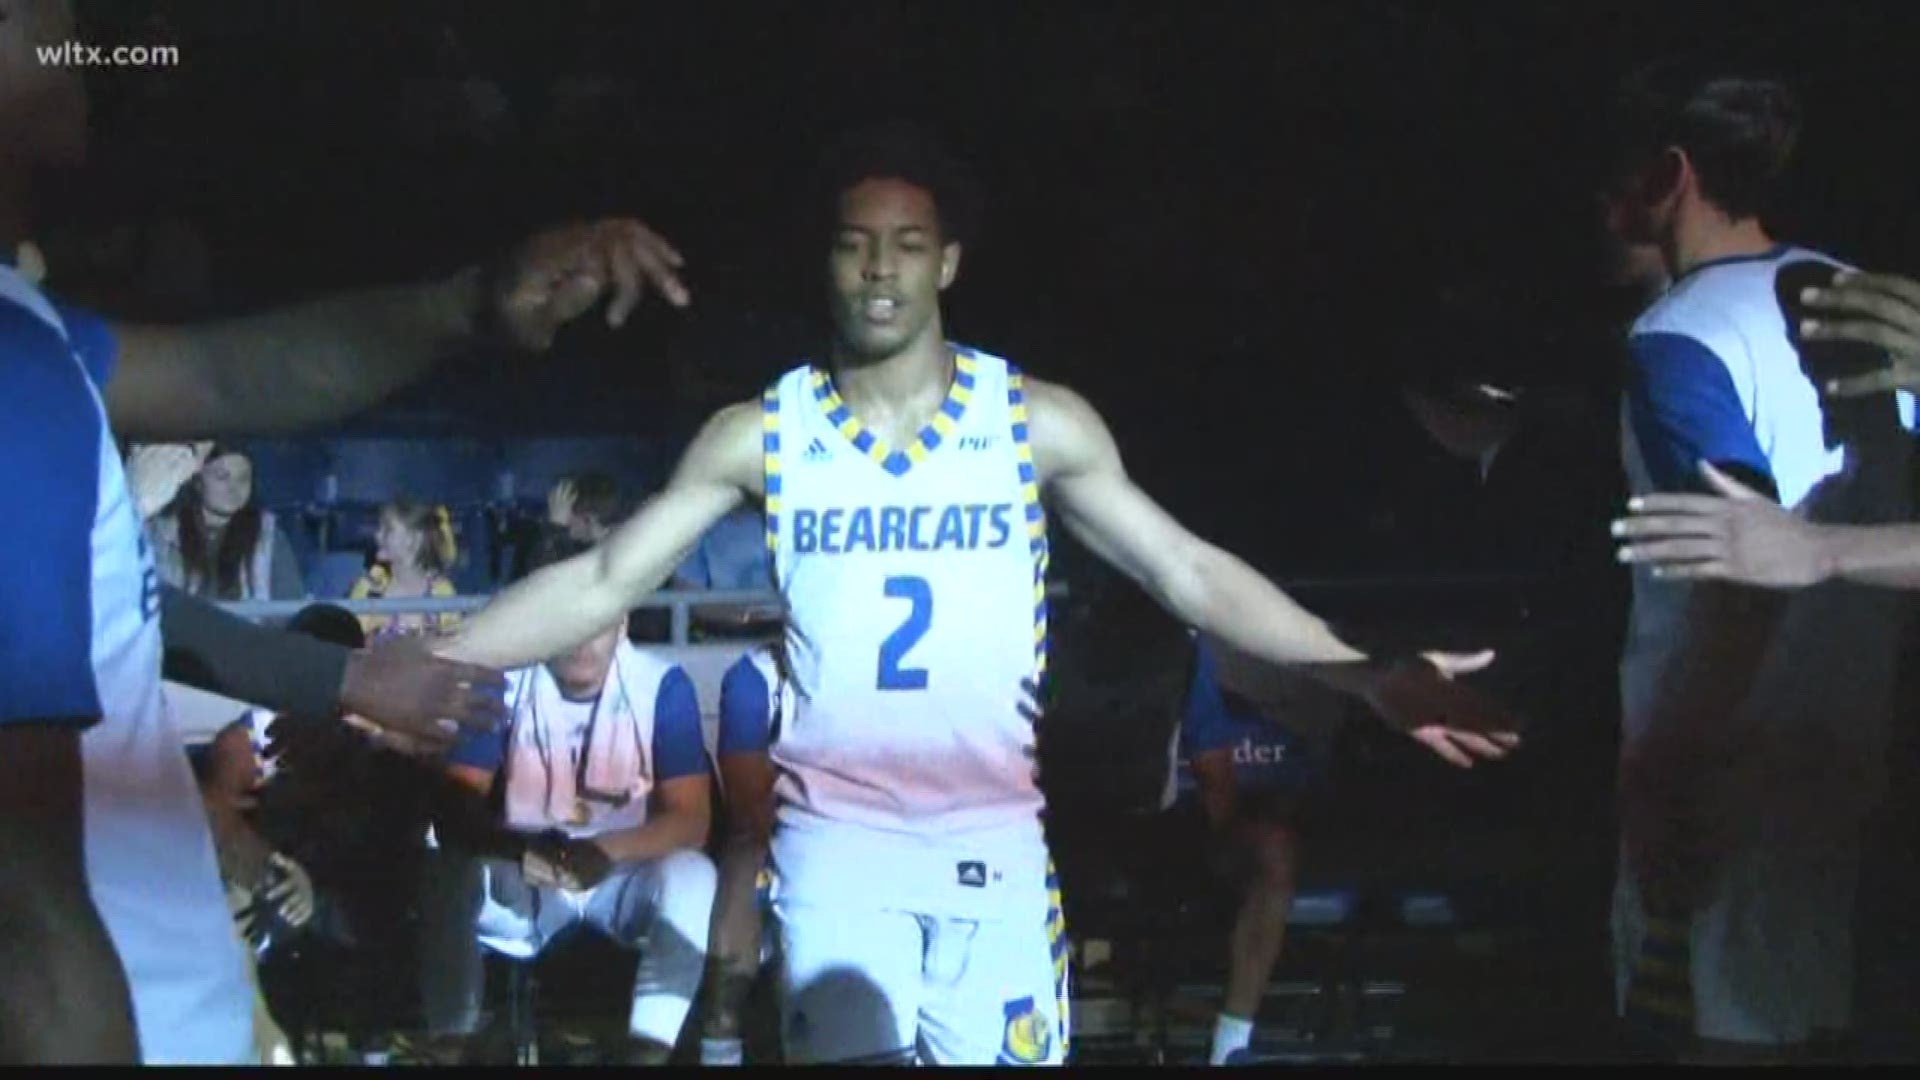 Both the Lander men and women's basketball teams have Midlands products who are playing major roles for Bearcat basketball.